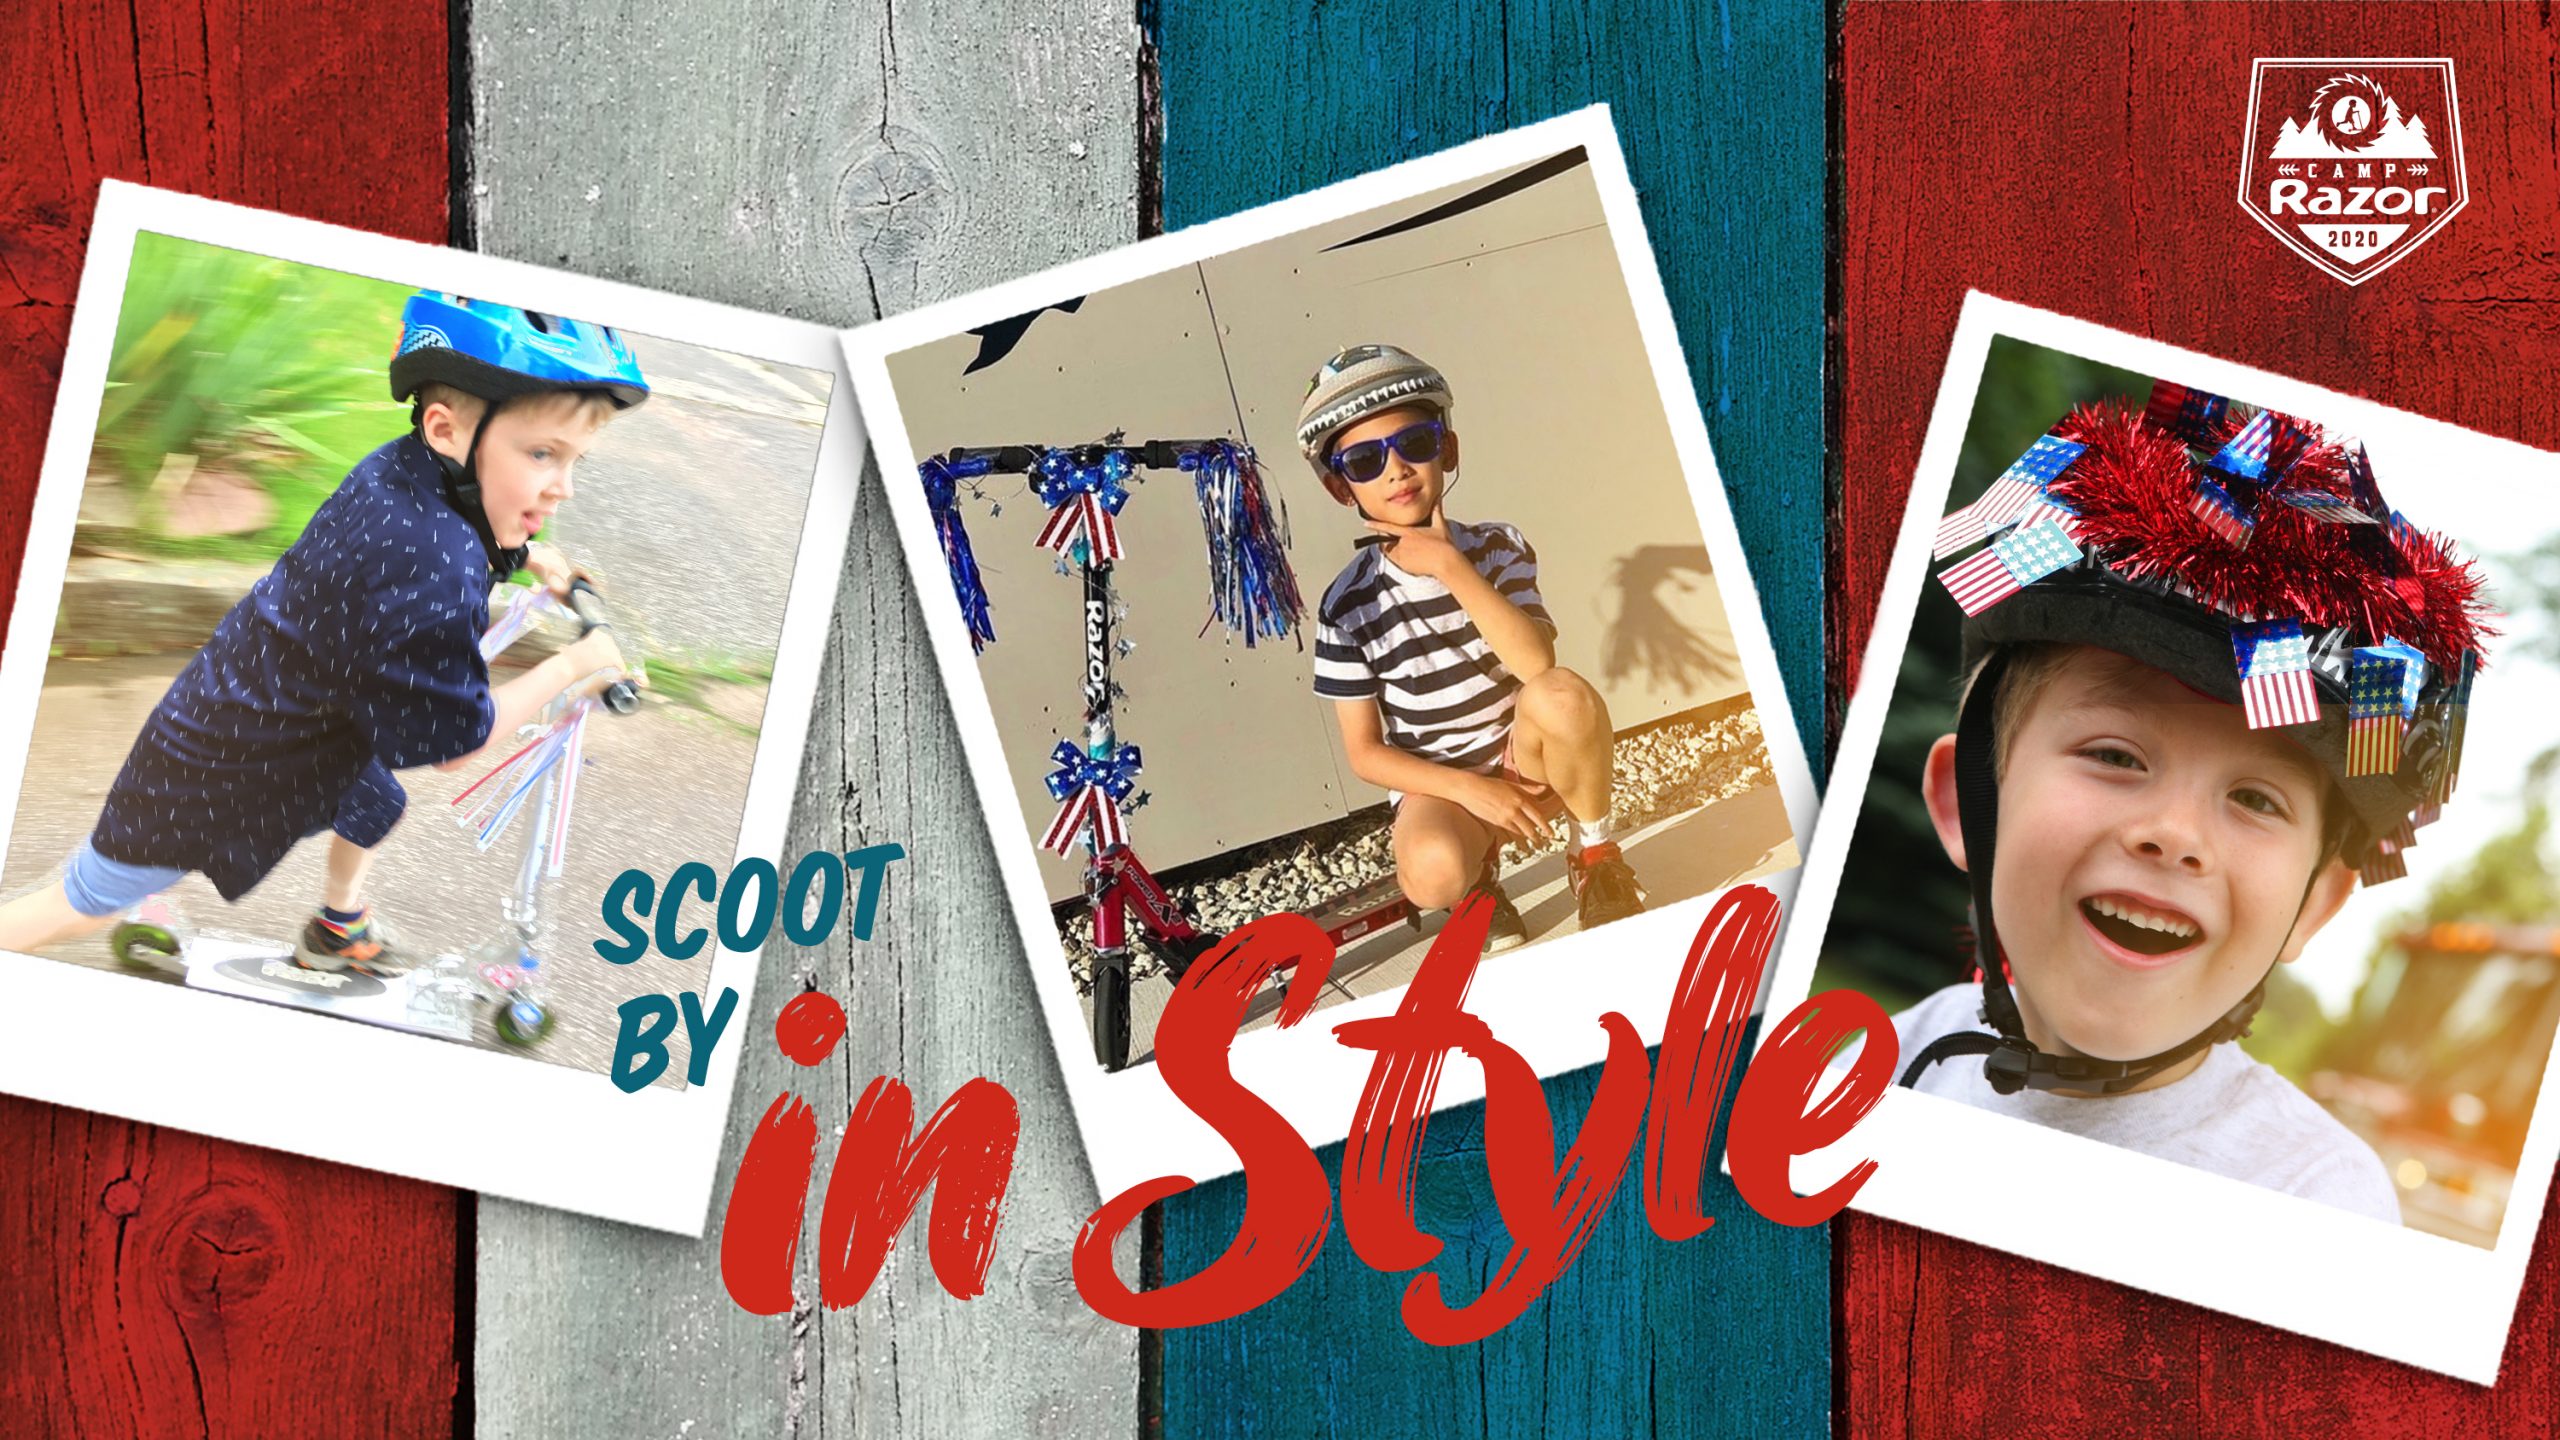 scoot by in style